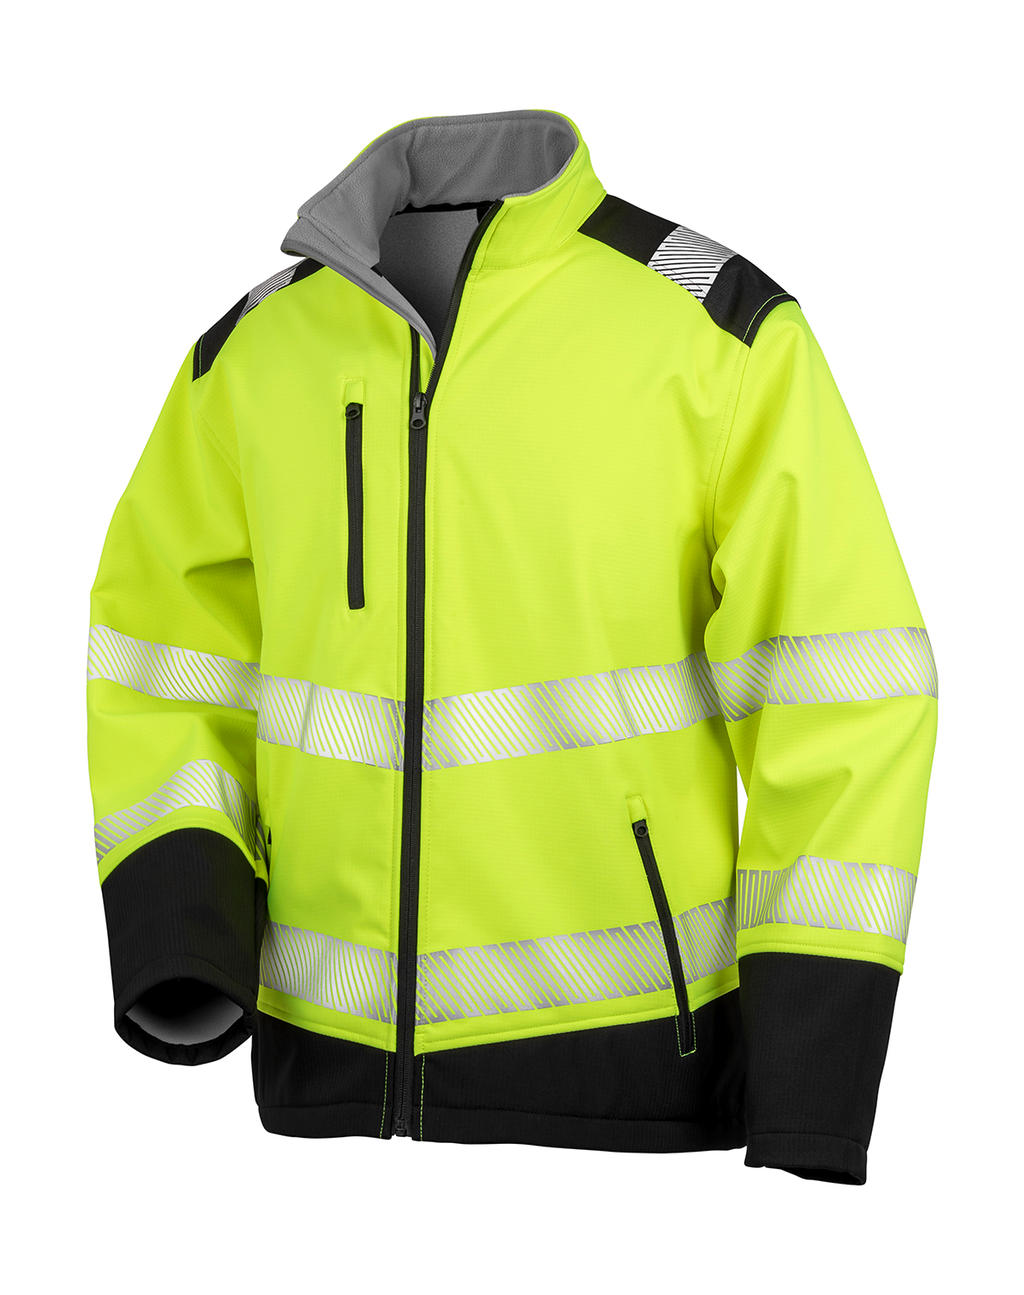  Printable Ripstop Safety Softshell in Farbe Fluorescent Yellow/Black